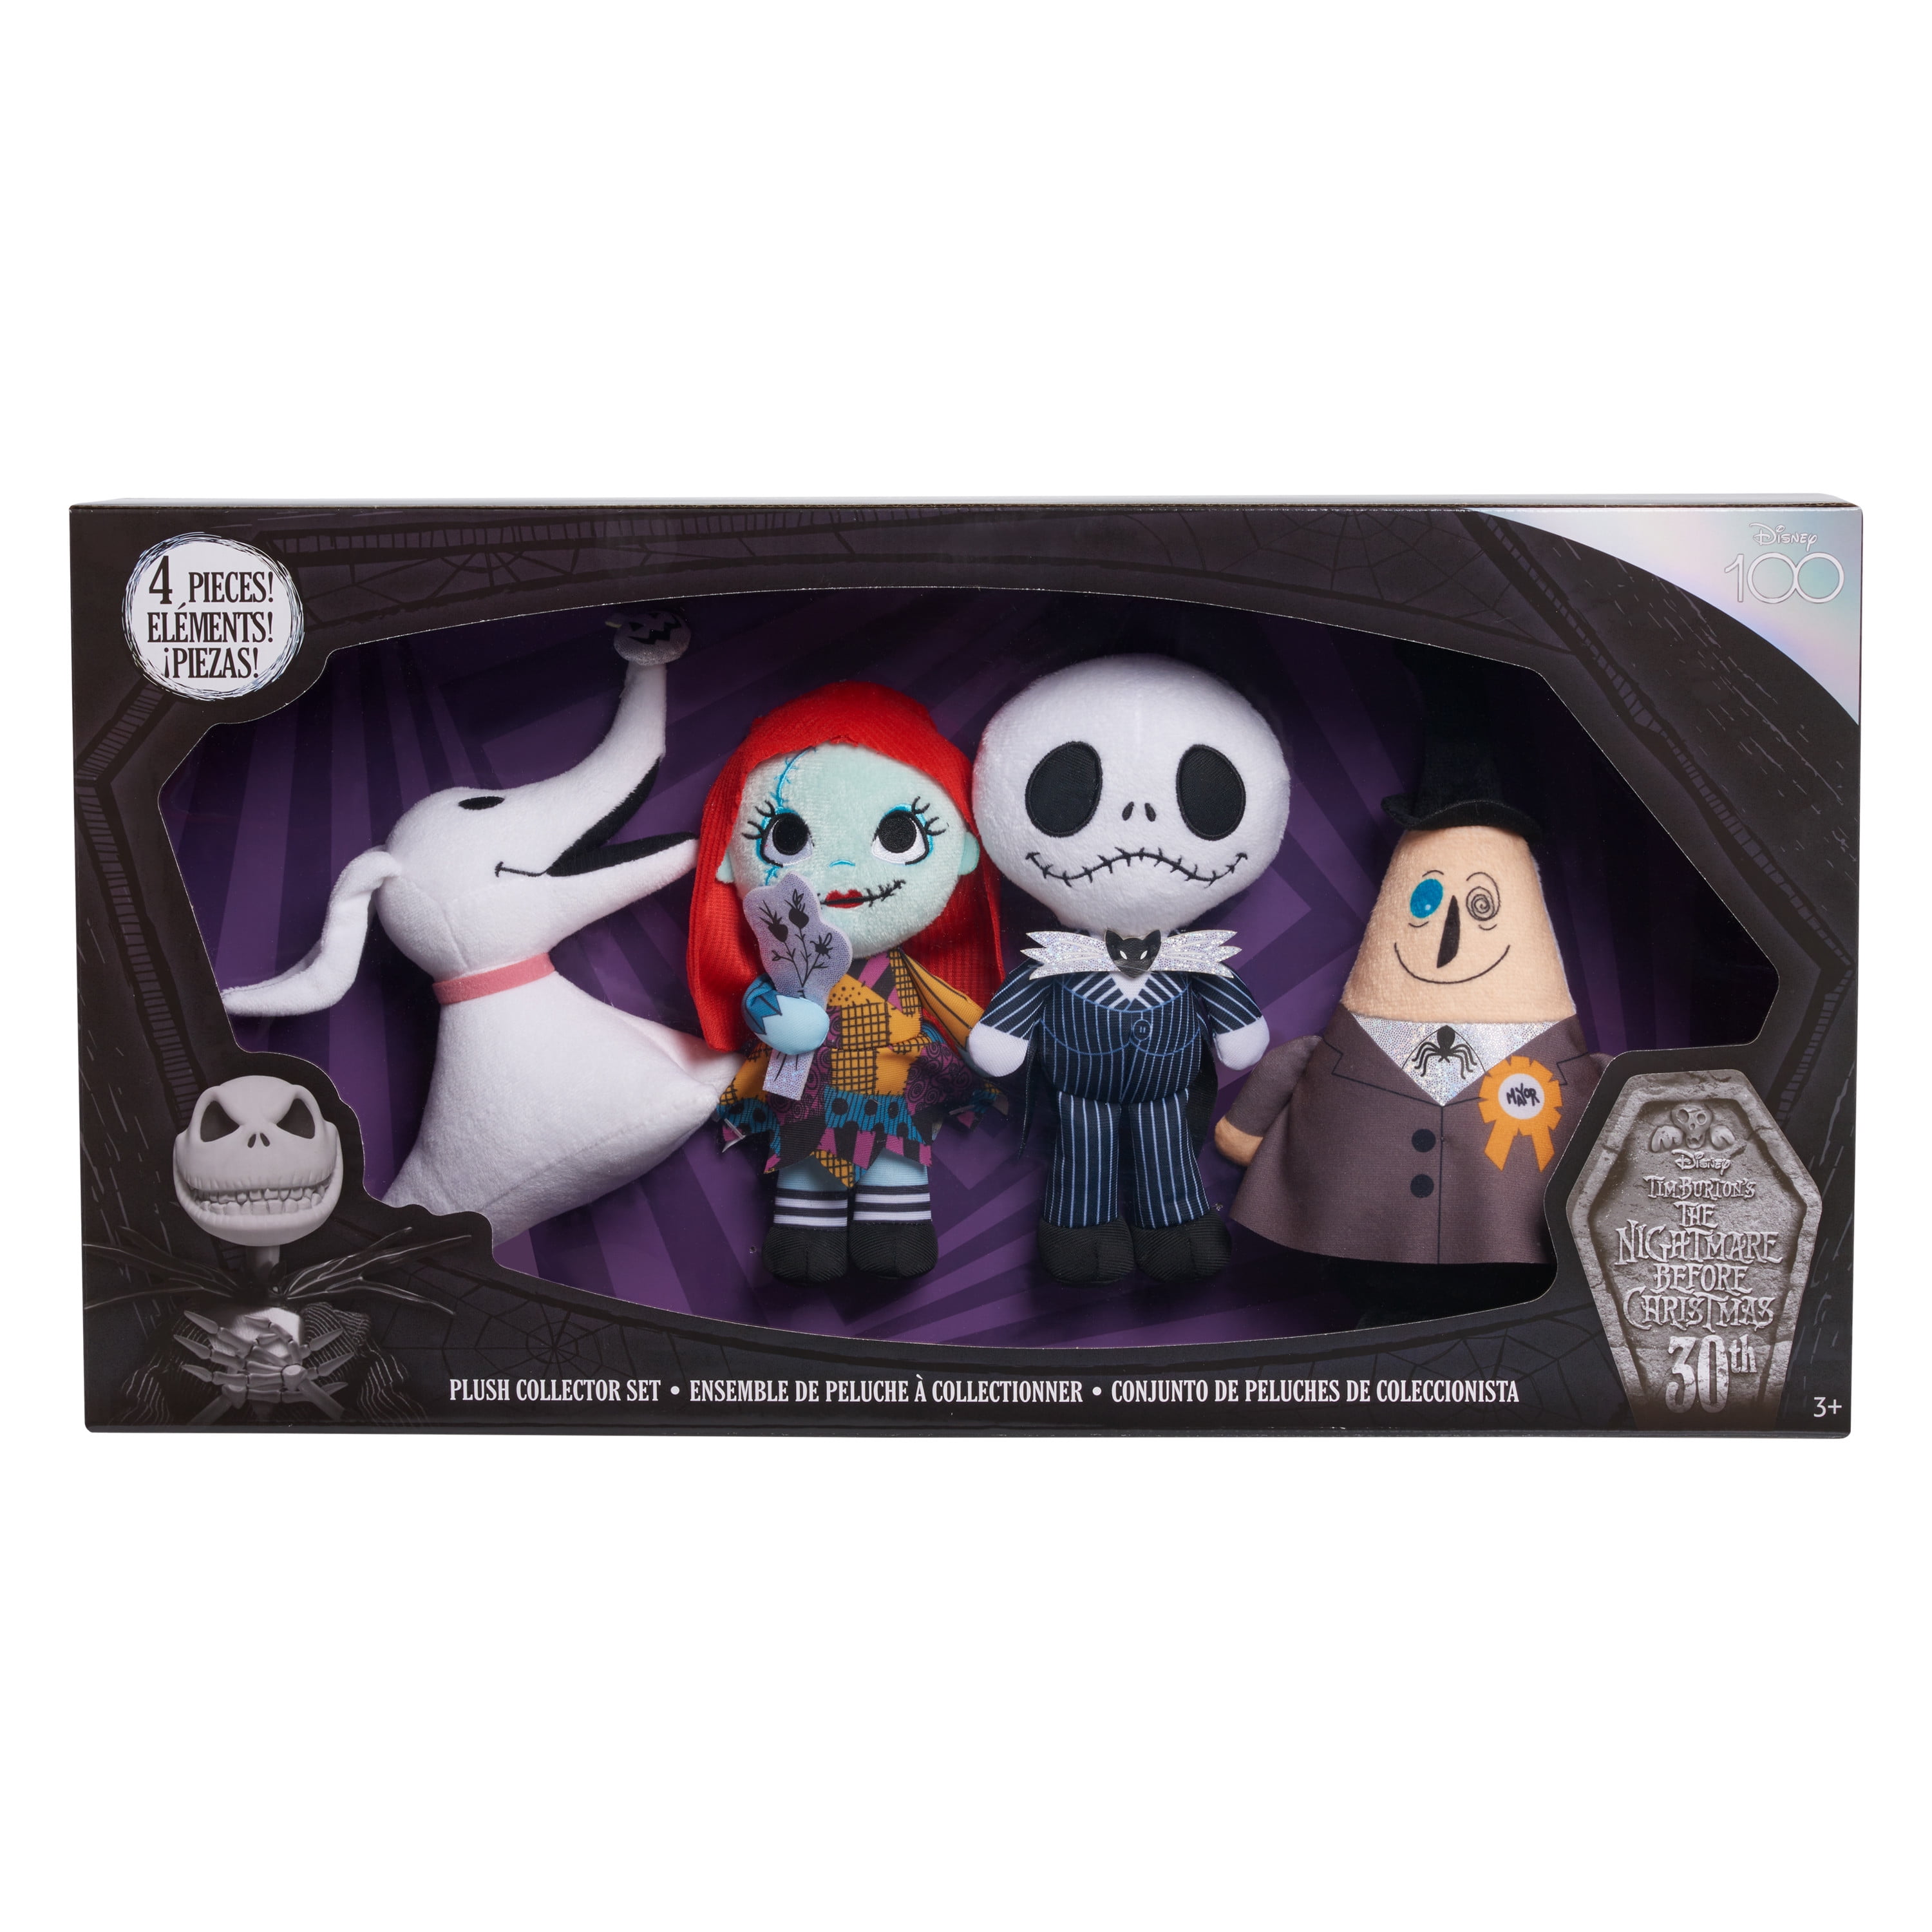 Disney Tim Burton's The Nightmare Before Christmas Disney100 4-piece Plush  Collector Set, Kids Toys for Ages 3 up